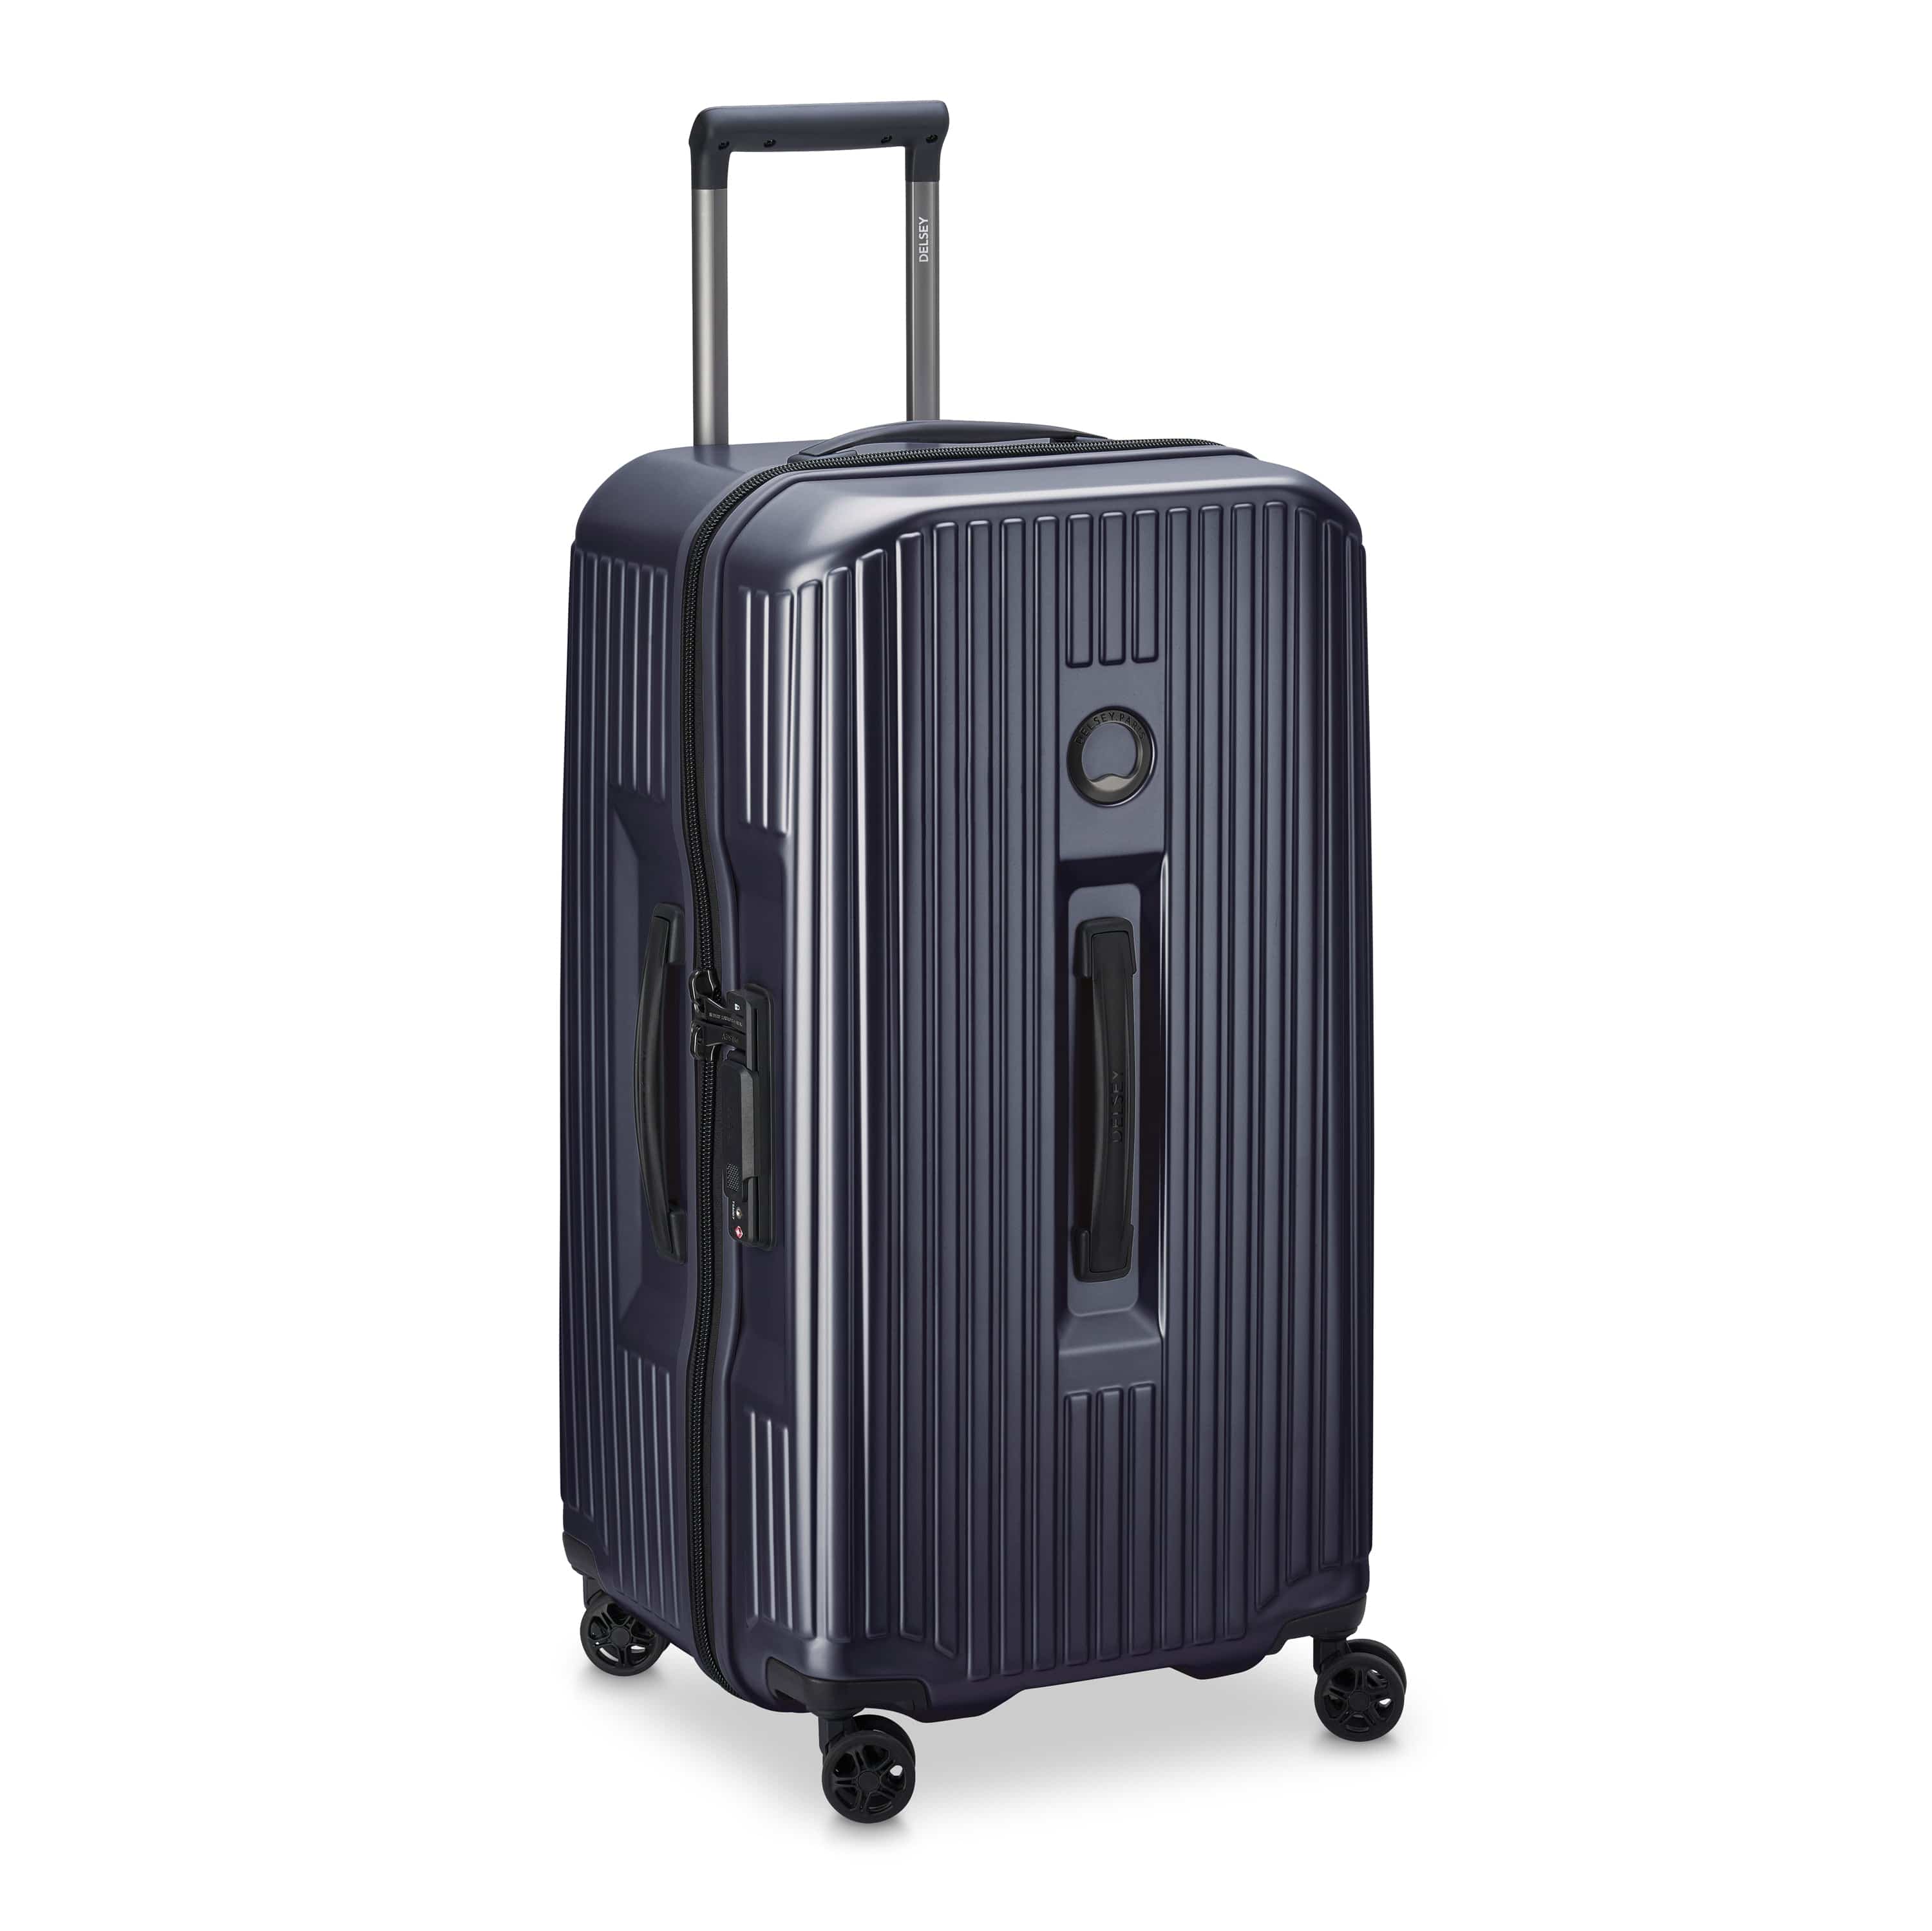 Delsey Securitime Trunk 73cm Hardcase 4 Double Wheel Check-In Luggage Trolley Anthracite - 00217381801